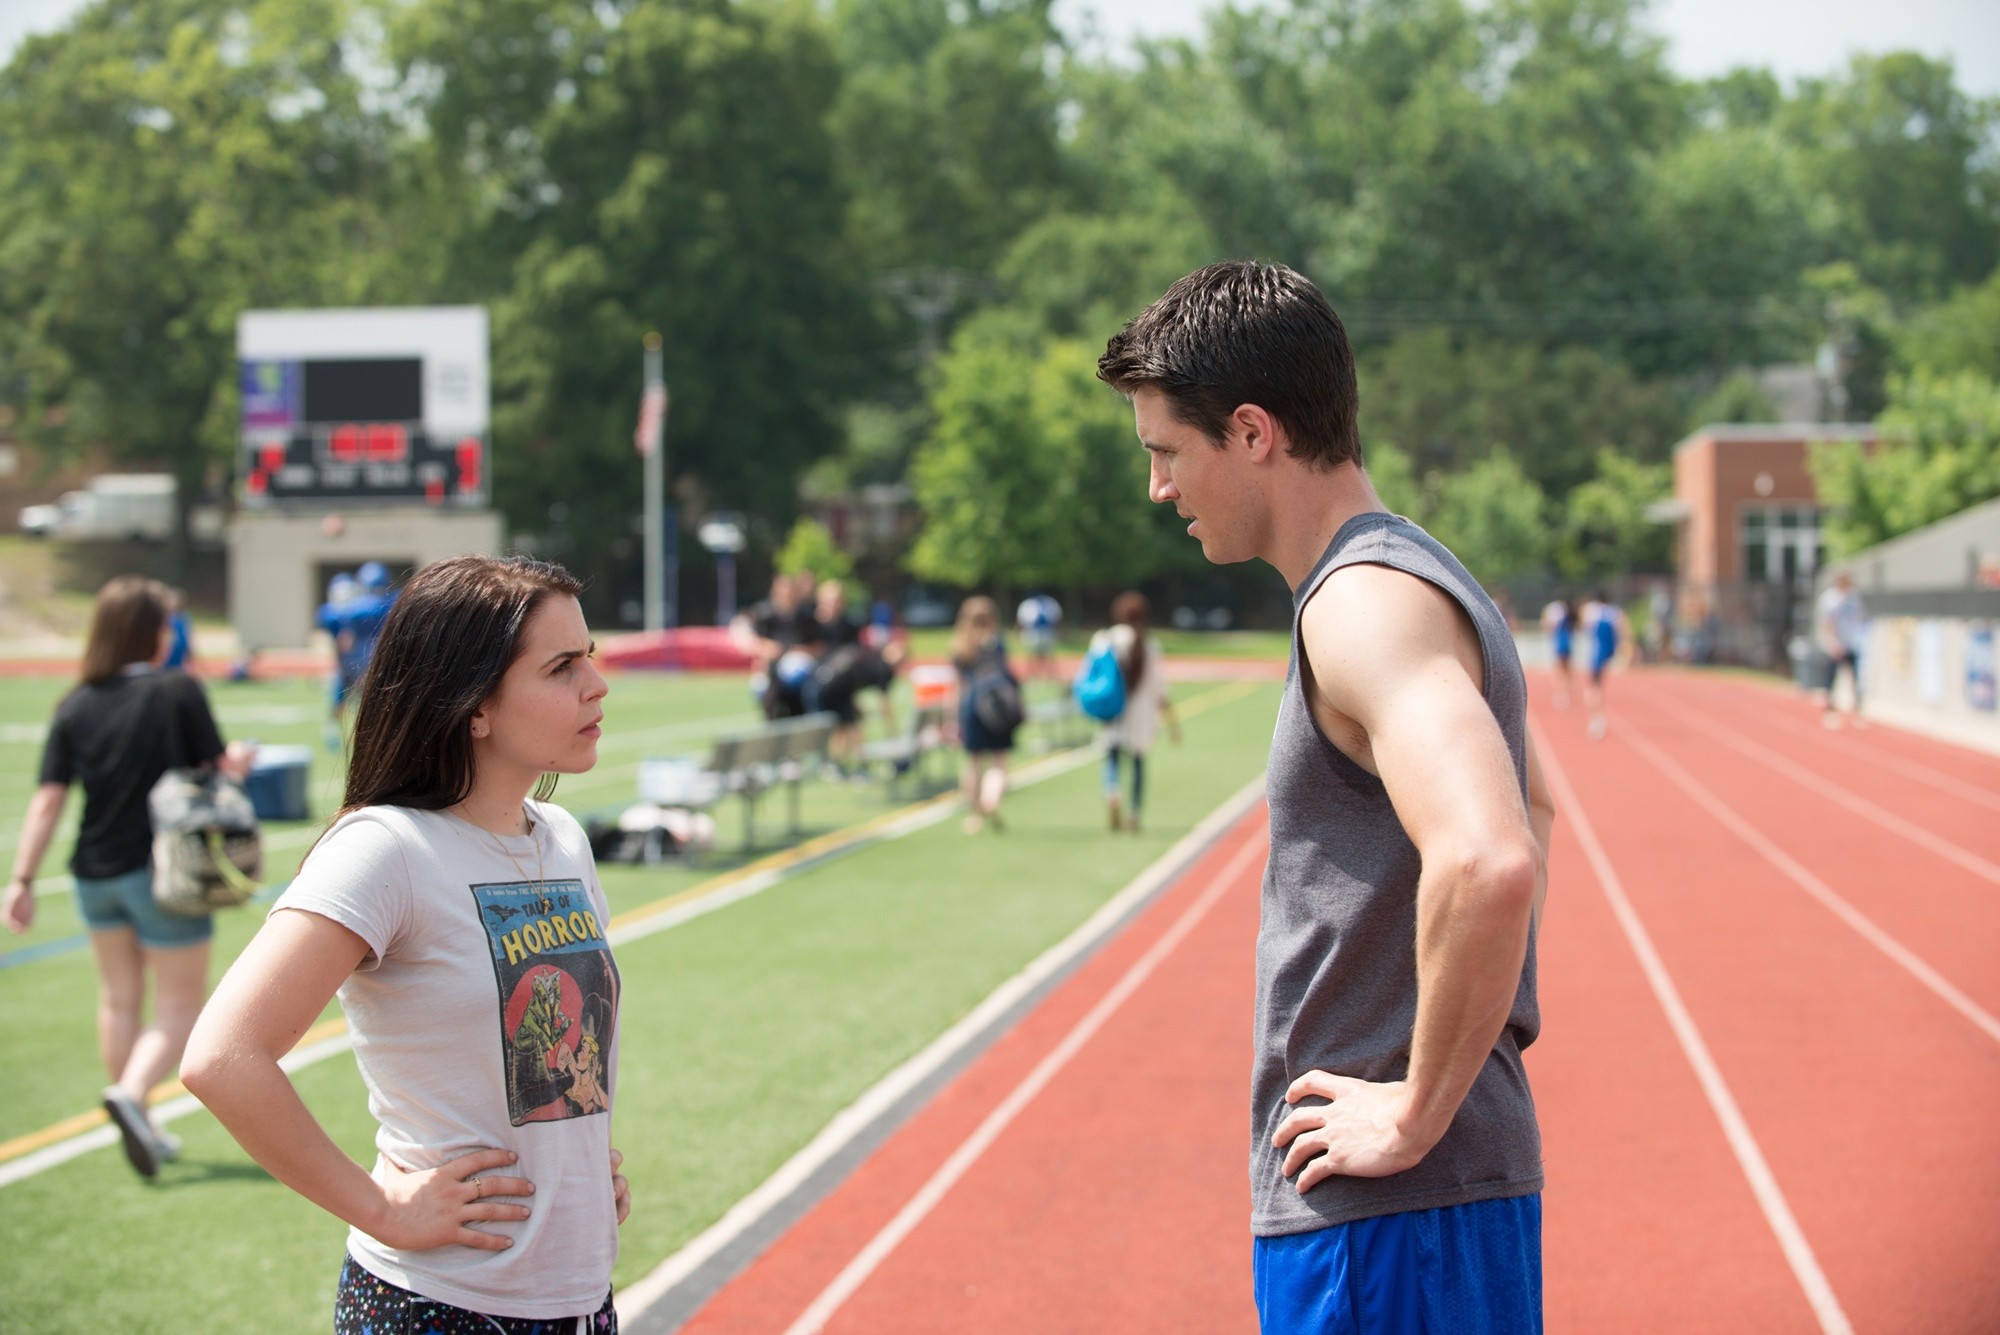 Mae Whitman stars as Bianca and Robbie Amell stars as Wesley in CBS Films' The DUFF (2015)